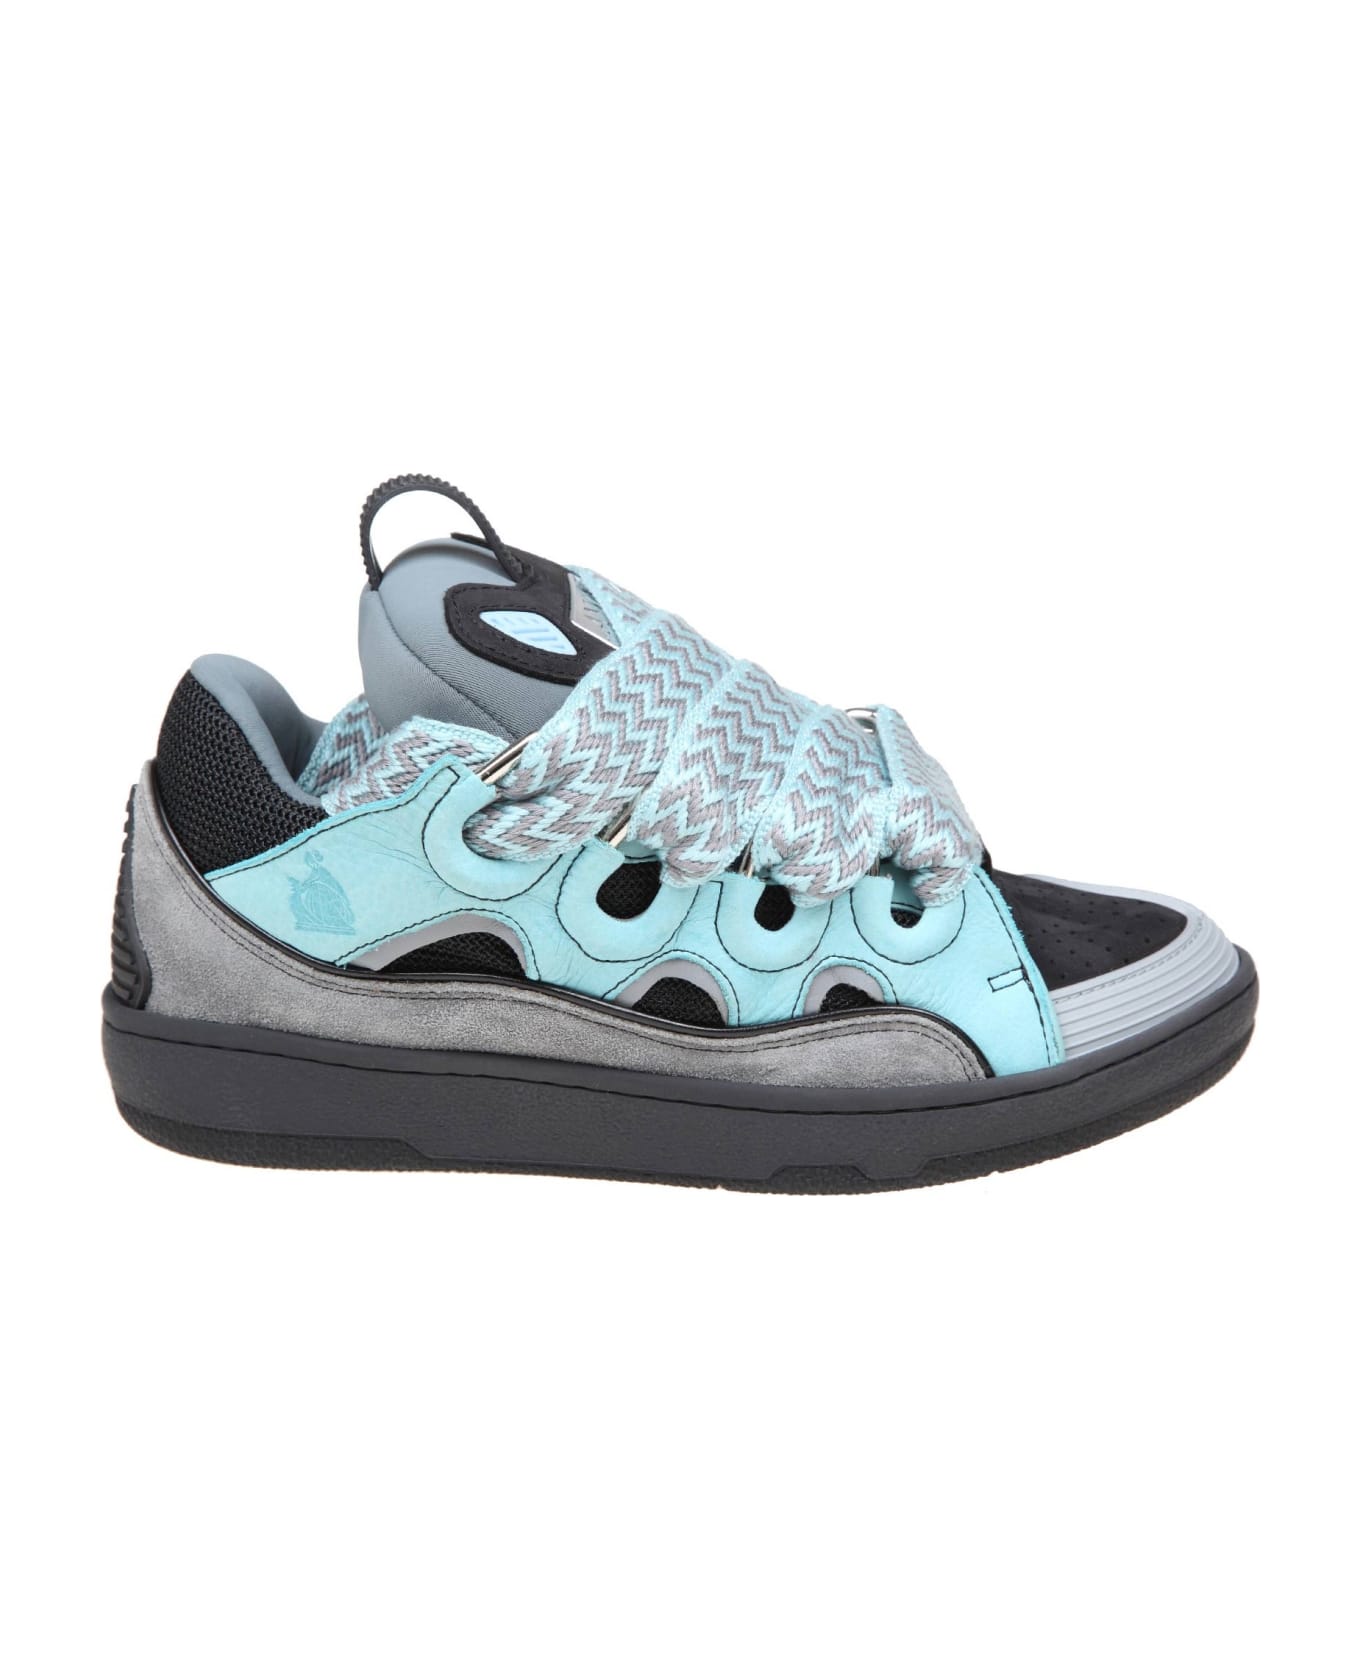 Lanvin Curb Sneakers In Suede And Fabric Color Light Blue/anthracite - LIGHT/BLUE/ANTHRACITE